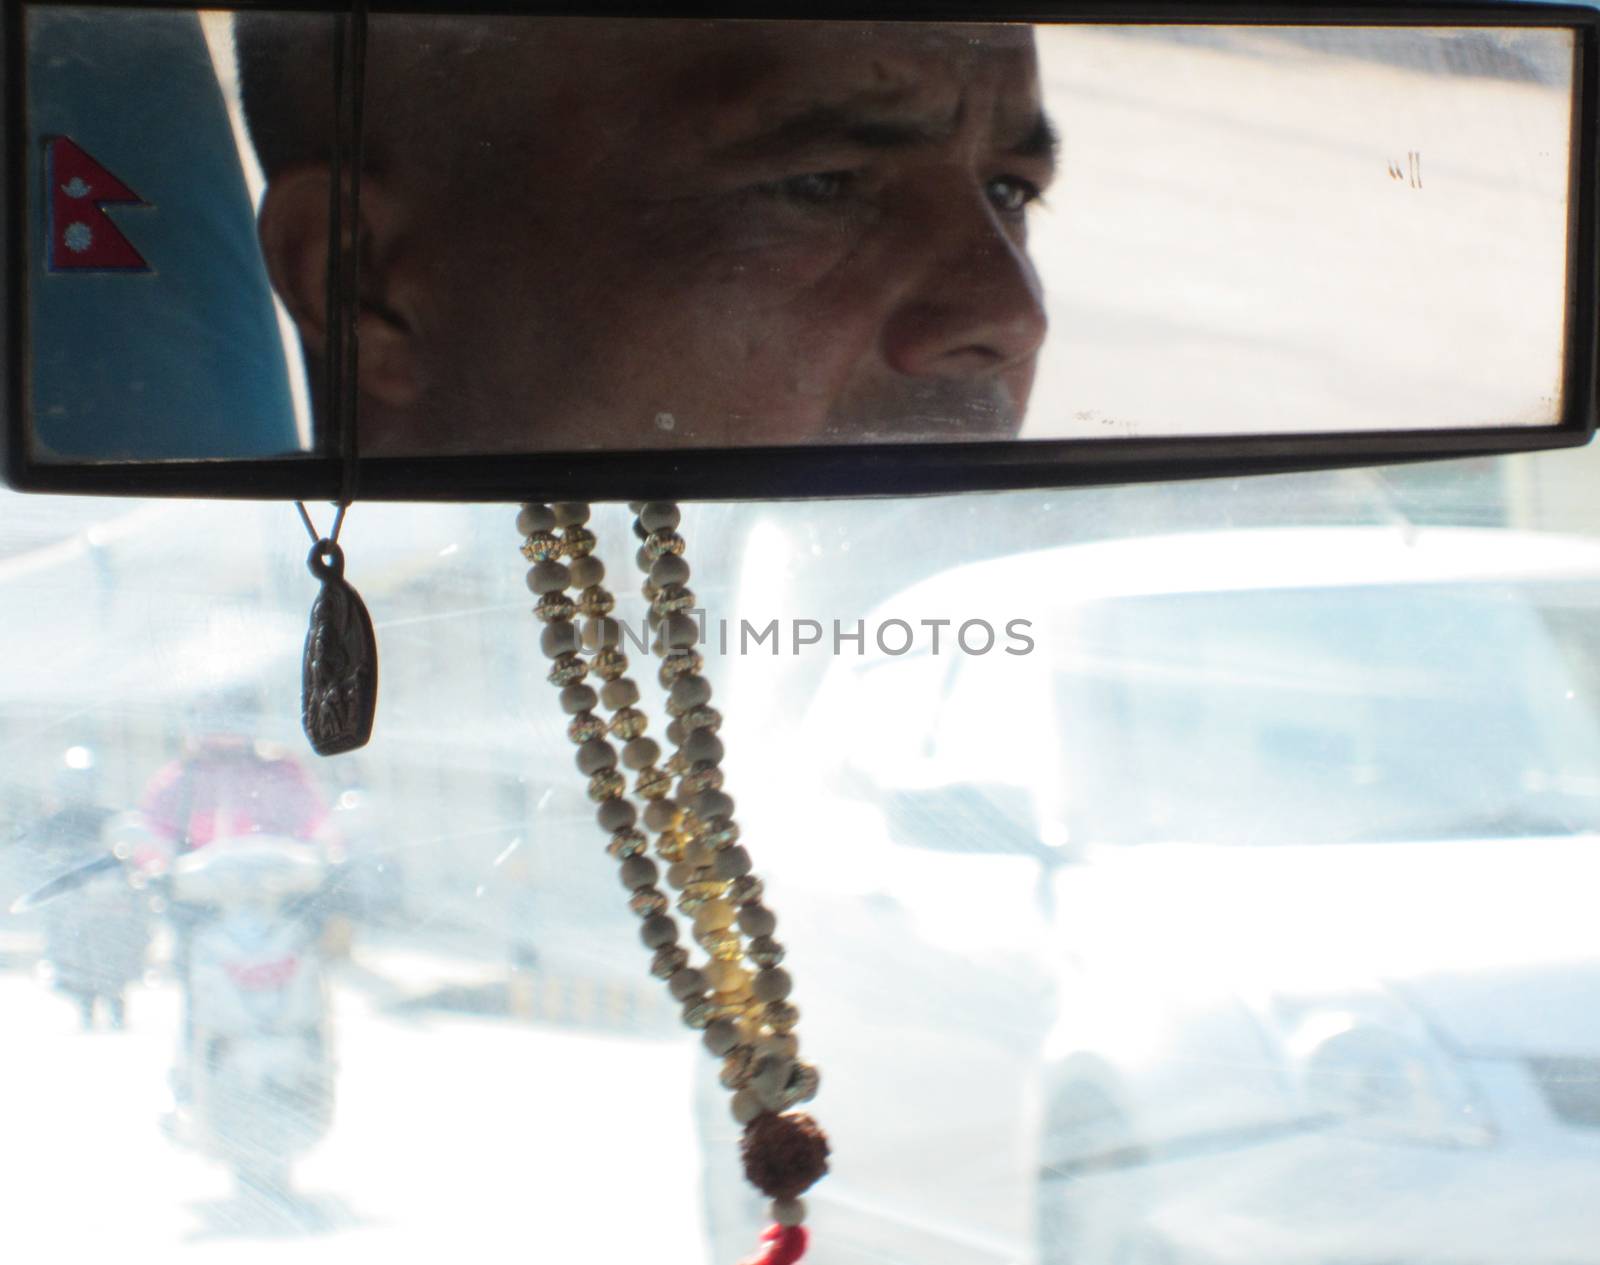 KATHMANDU, NEPAL - APRIL 1, 2015: The Picture is taken from the rear bench inside of a cap  showing the Nepalese driver reflecting in the mirror and some busy traffic through the front window during a dusty ride on April 1, 2015 in Kathmandu, Nepal.